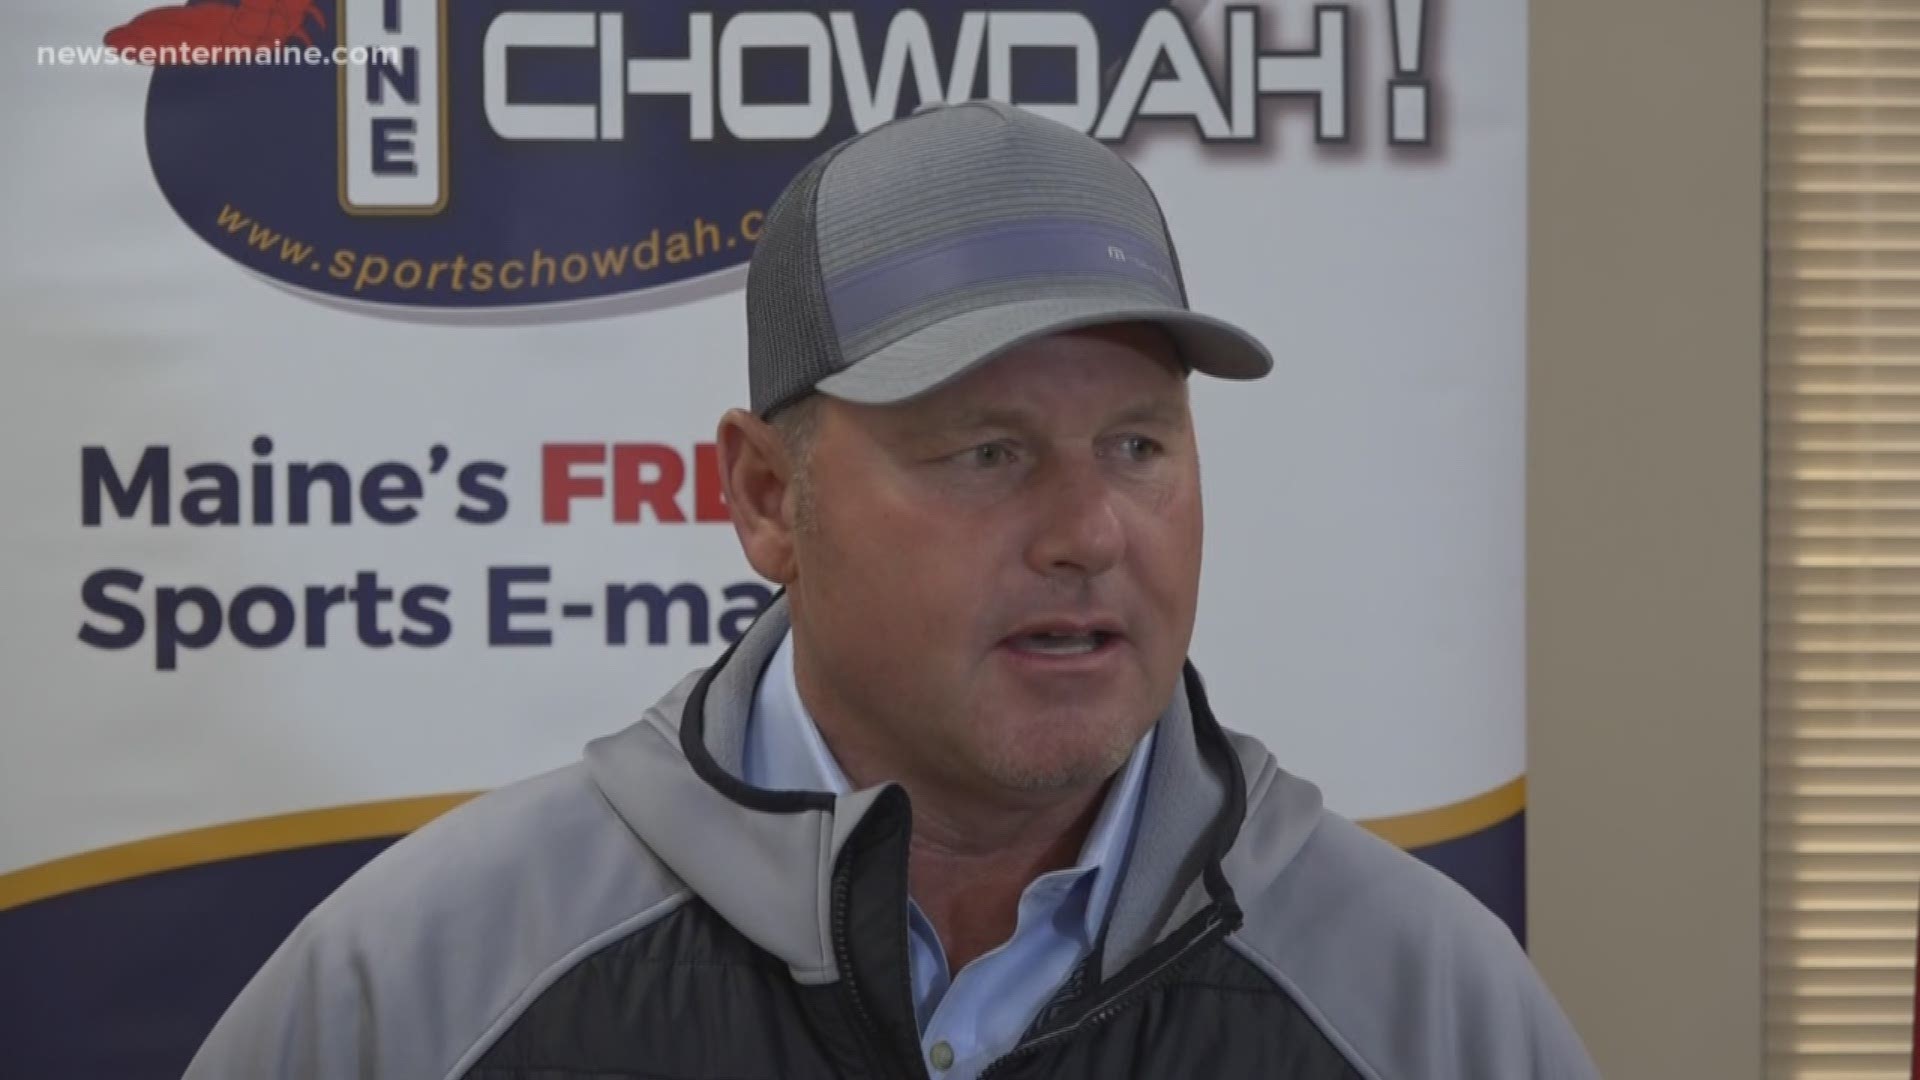 Former Red Sox ace, Roger Clemens visits with fans in Maine.